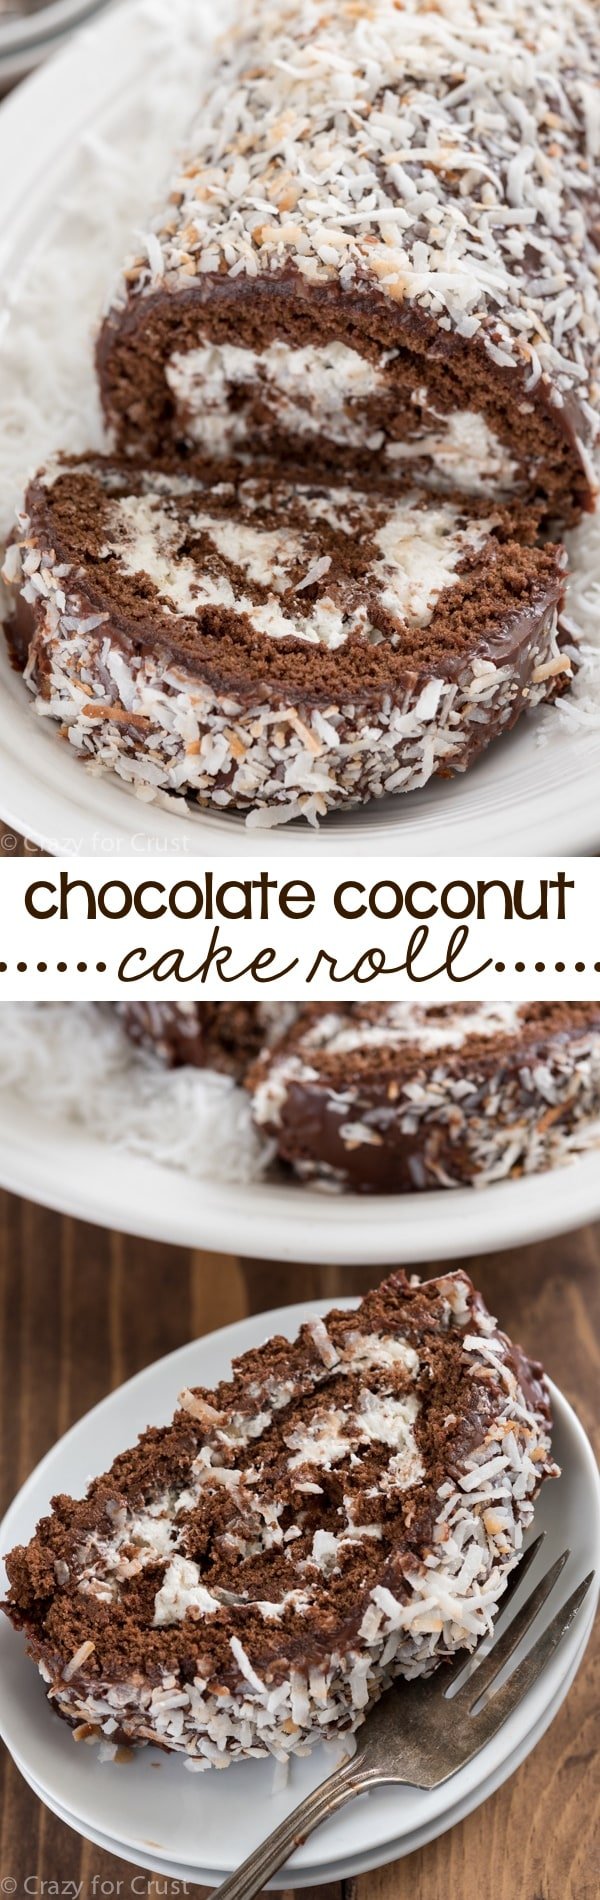 chocolate coconut cake roll collage